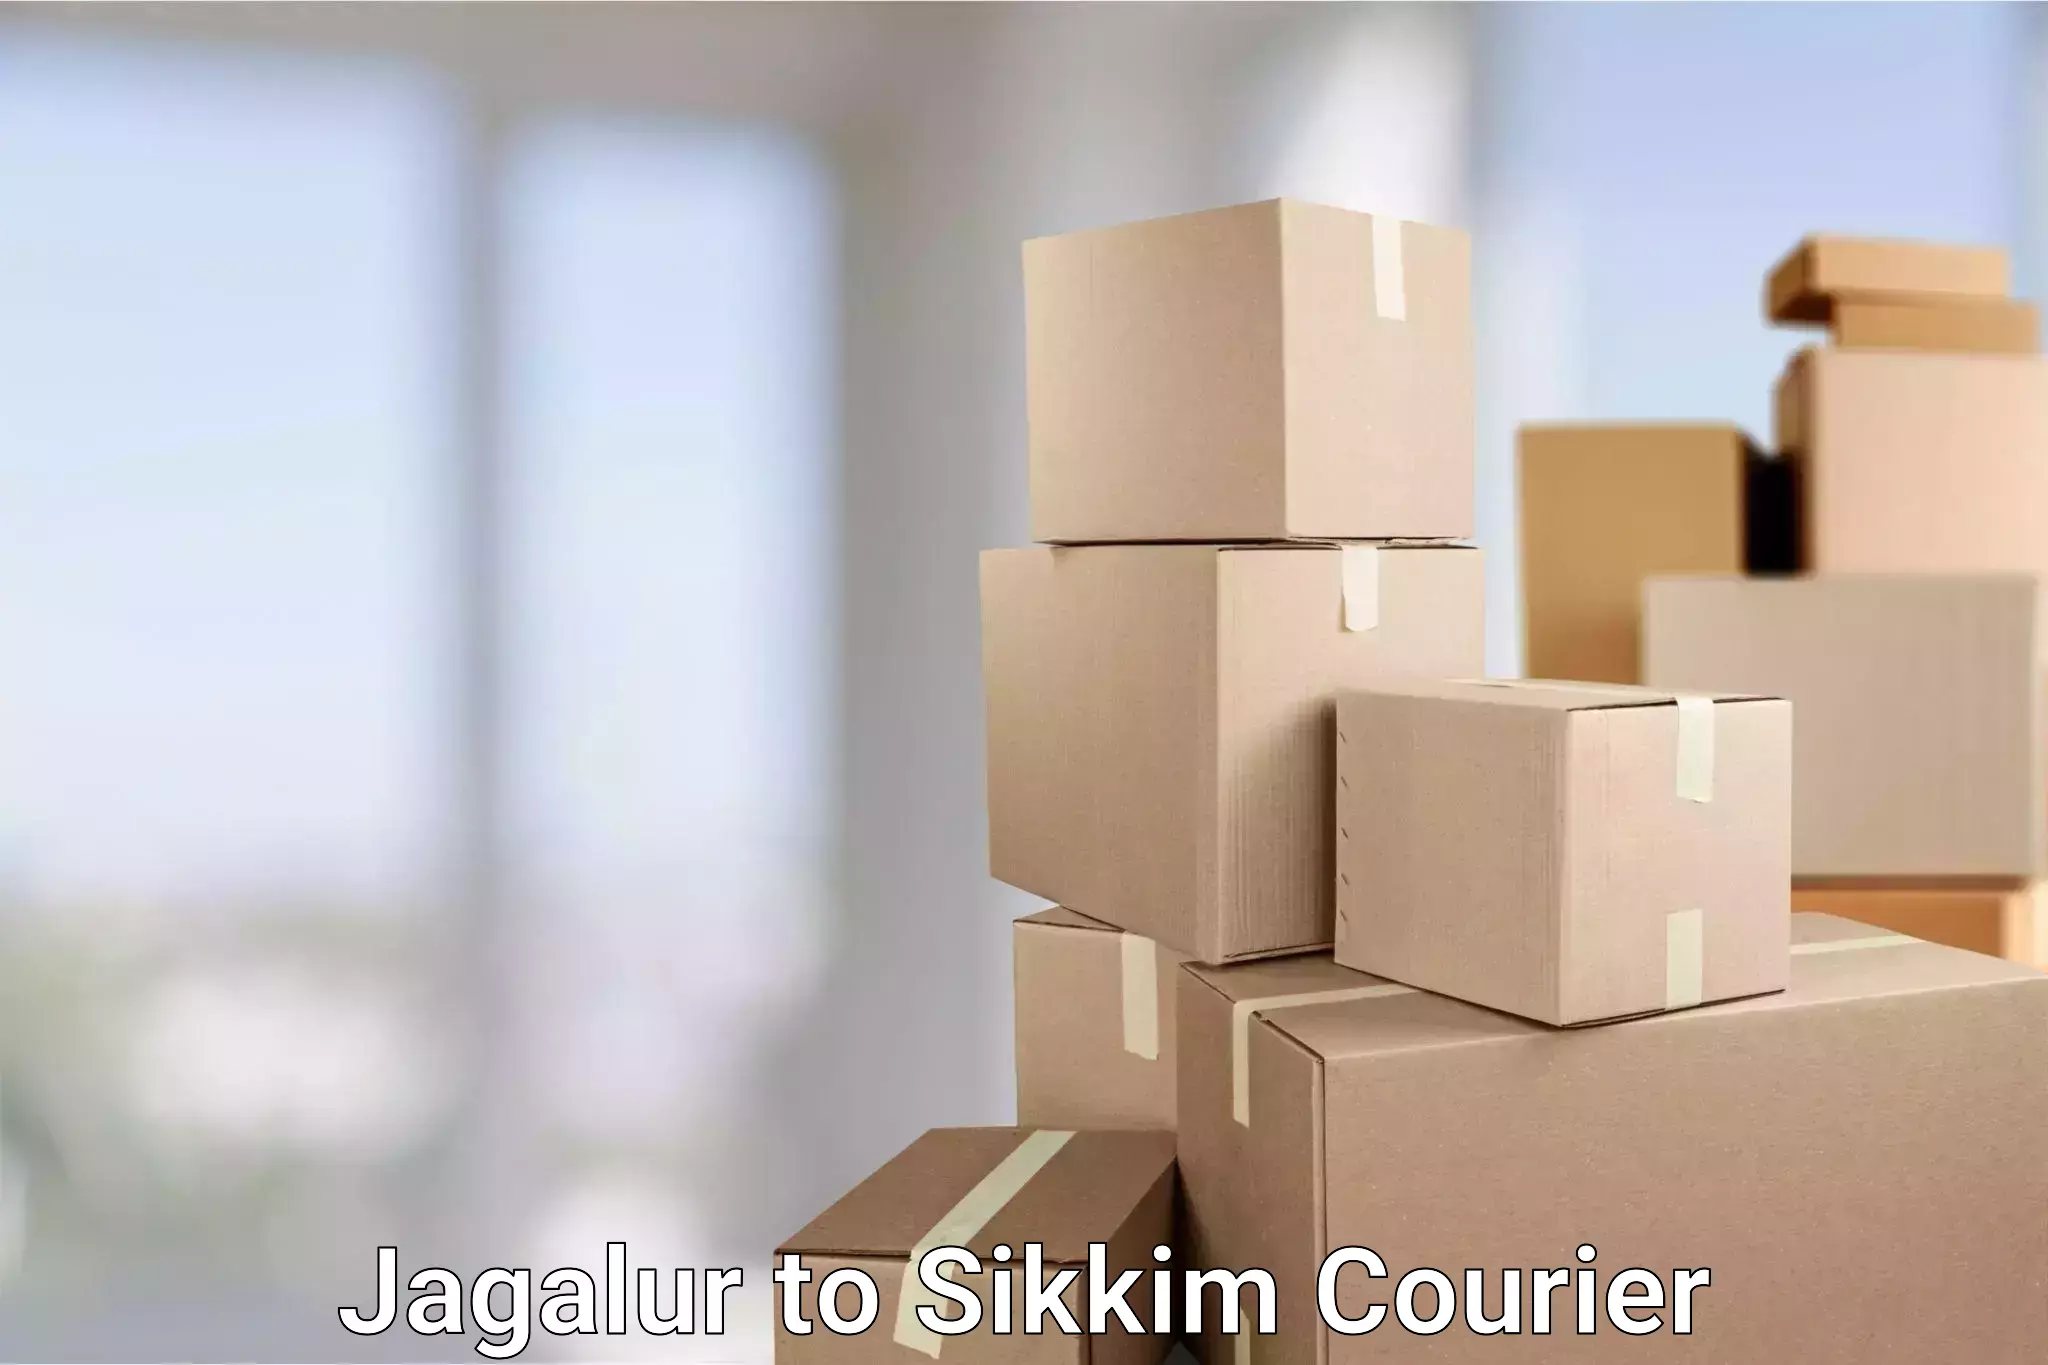 Full-service courier options Jagalur to Namchi